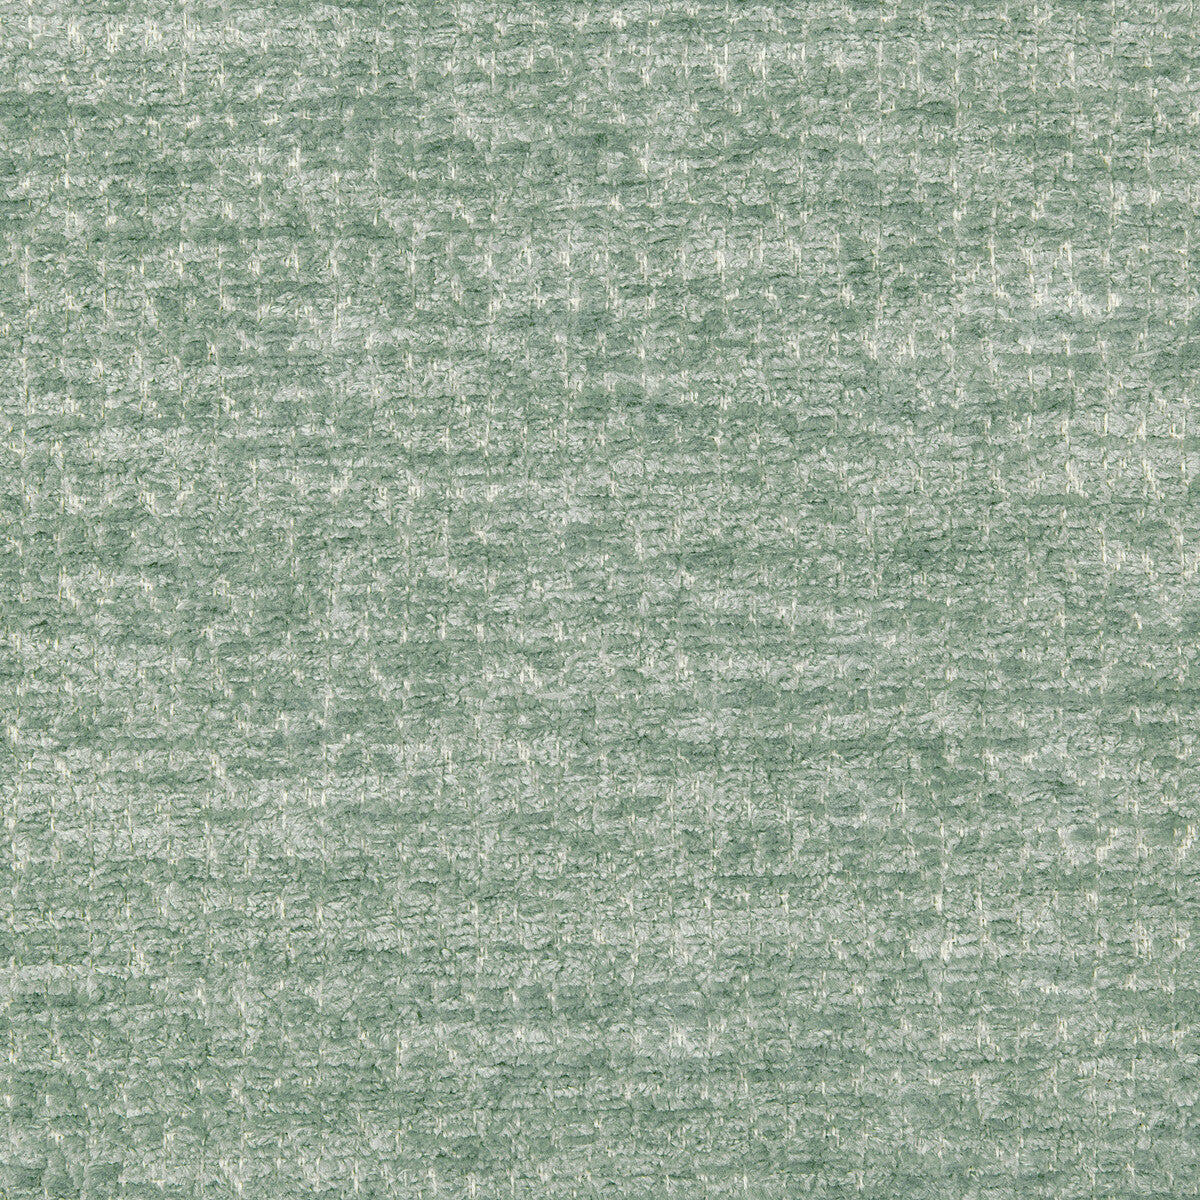 Cassien Texture fabric in aqua color - pattern 8019146.13.0 - by Brunschwig &amp; Fils in the Chambery Textures II collection